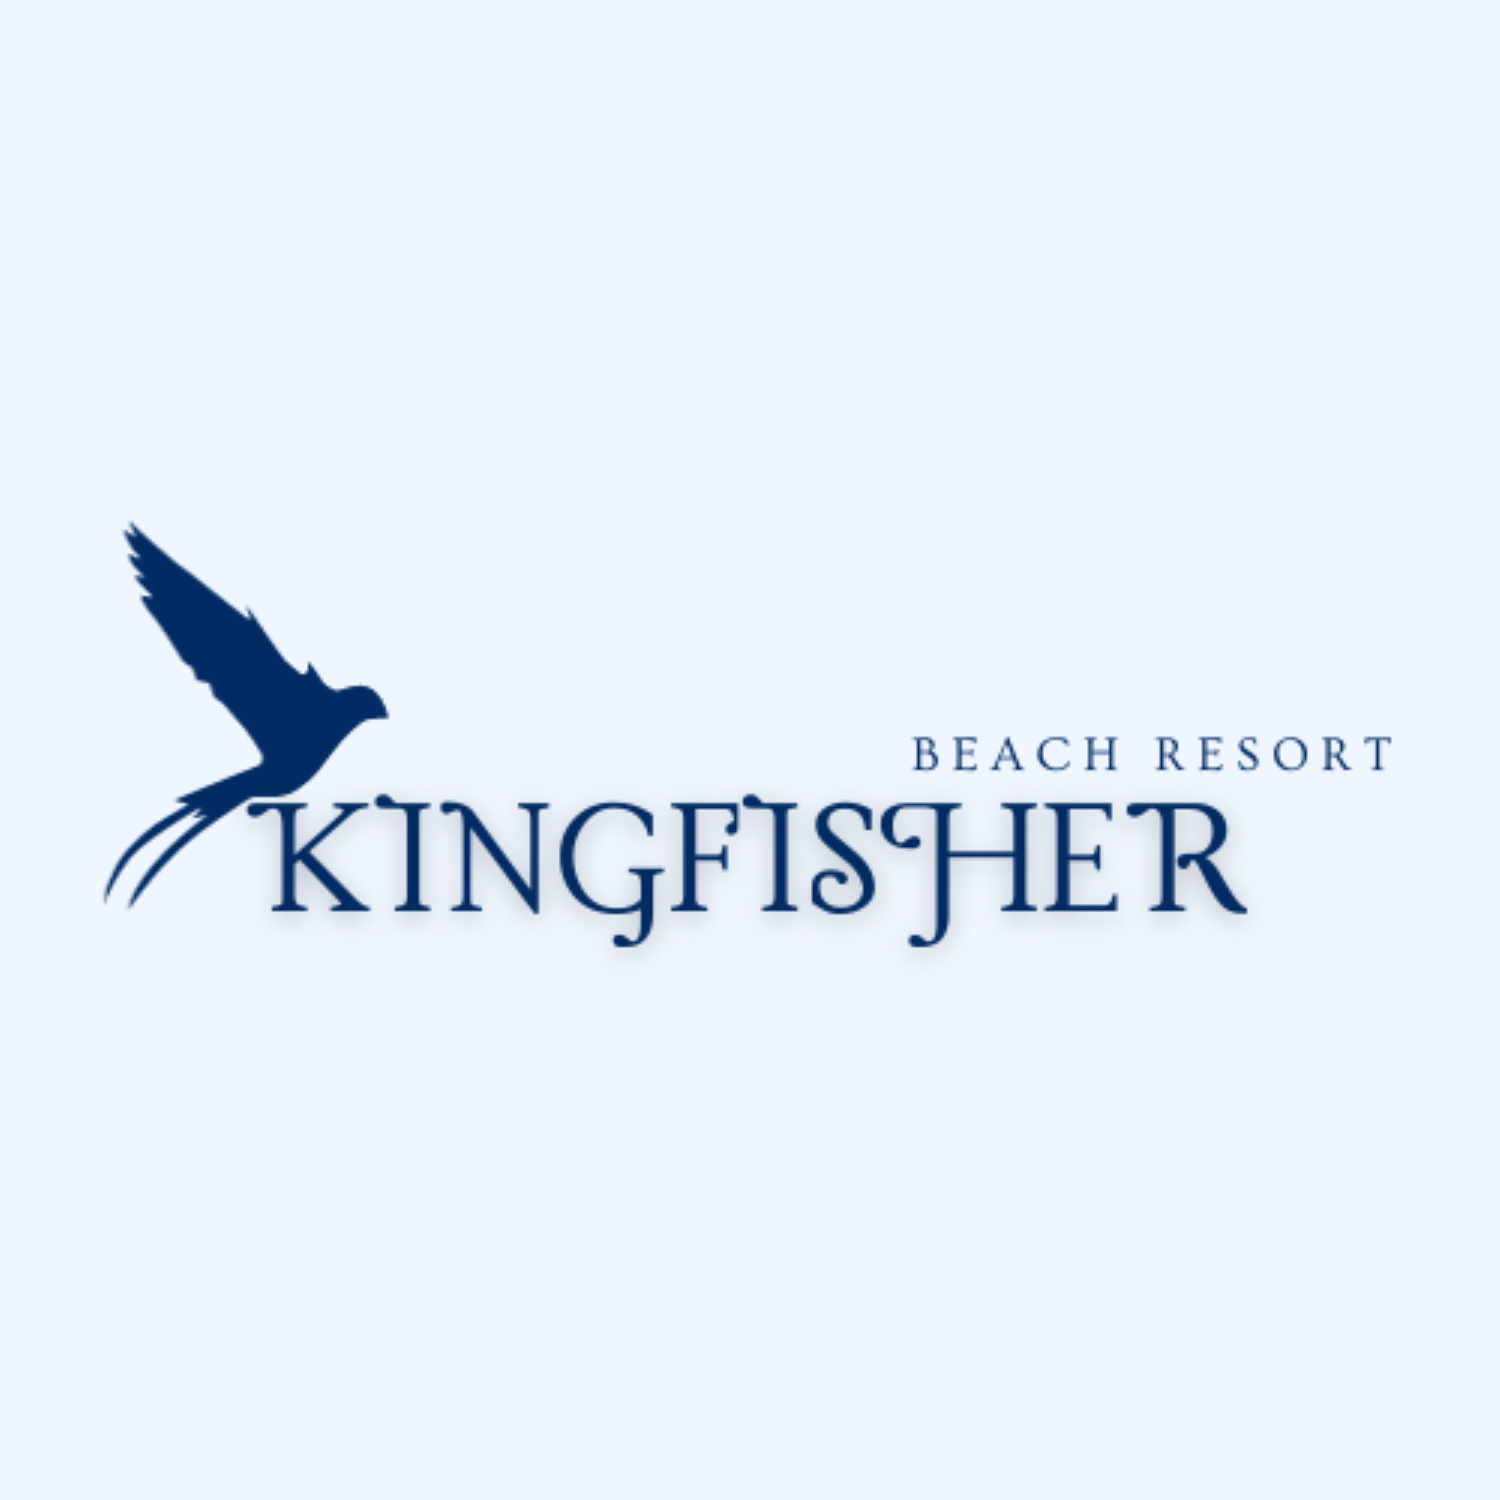 Kingfisher Airlines trademarks put up for auction | World IP Review